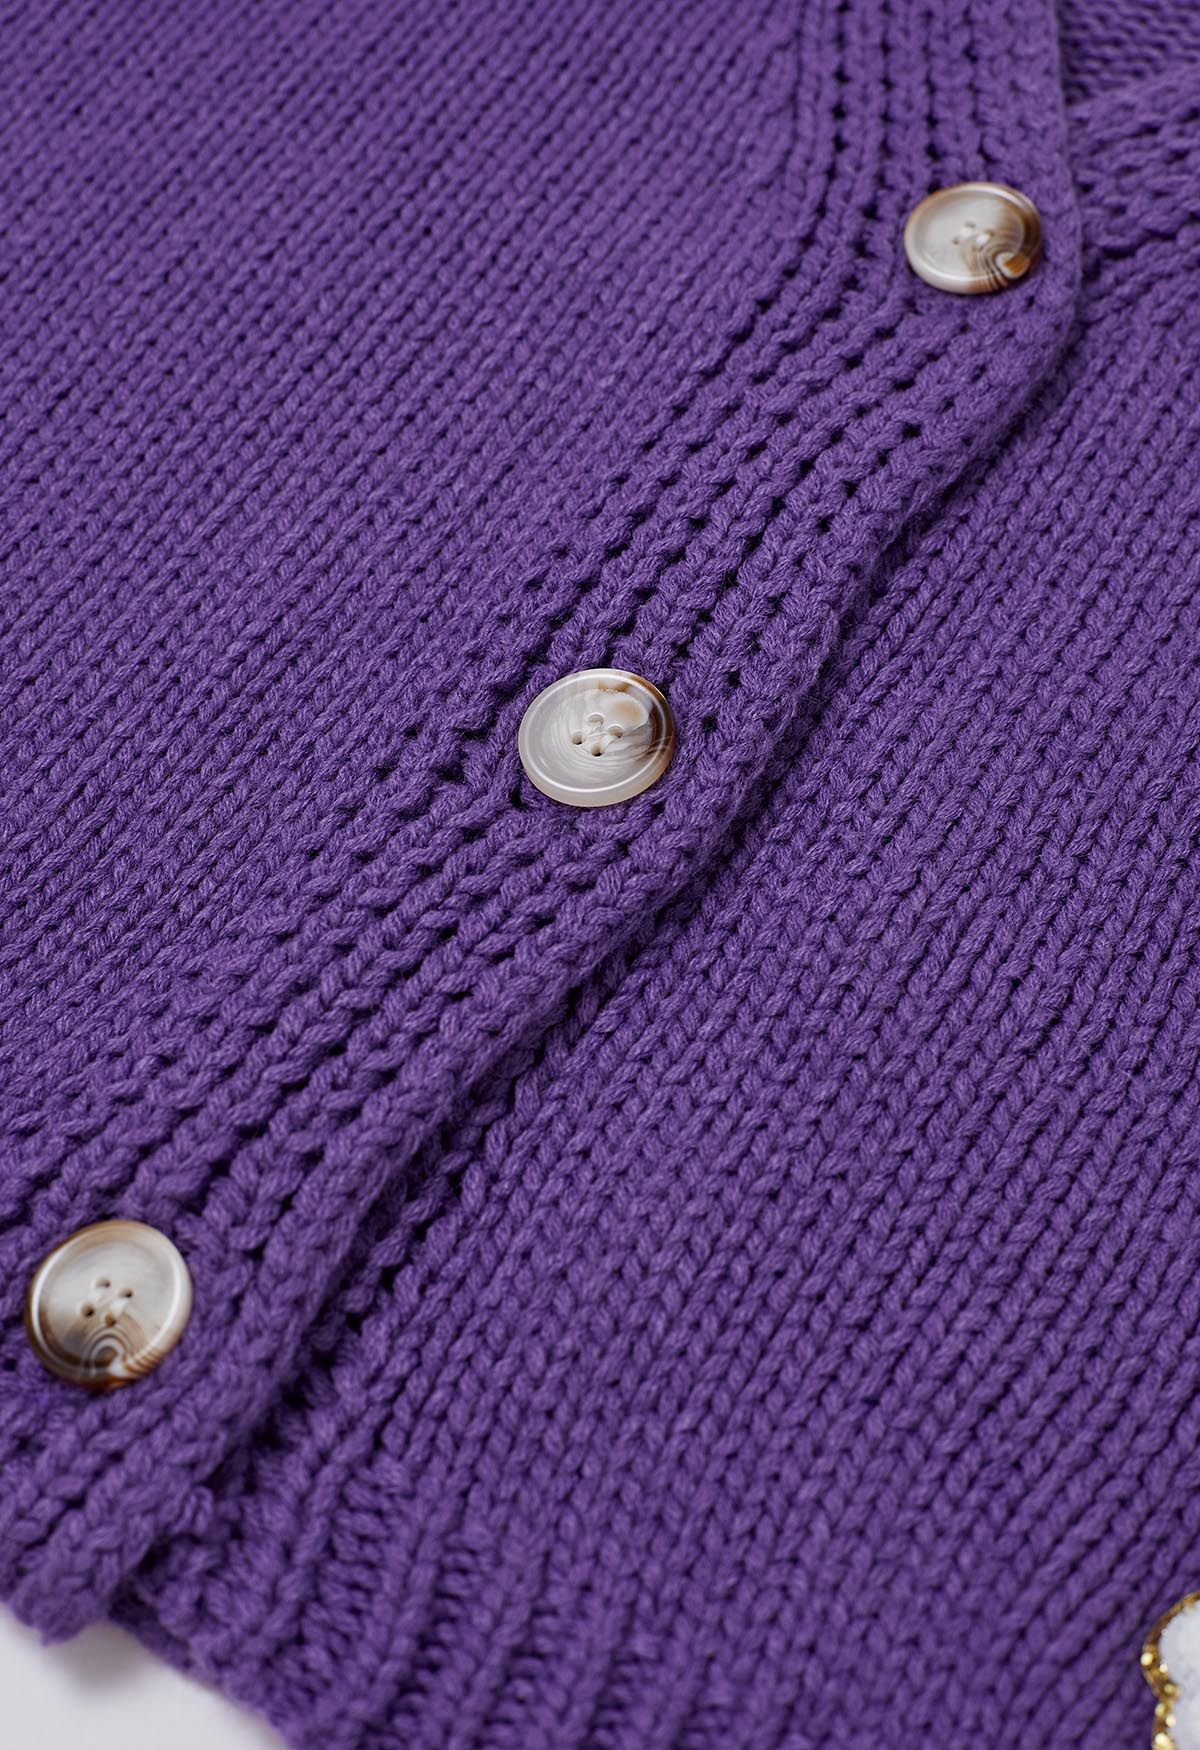 Halloween Ghost Patch Buttoned Knit Cardigan in Purple